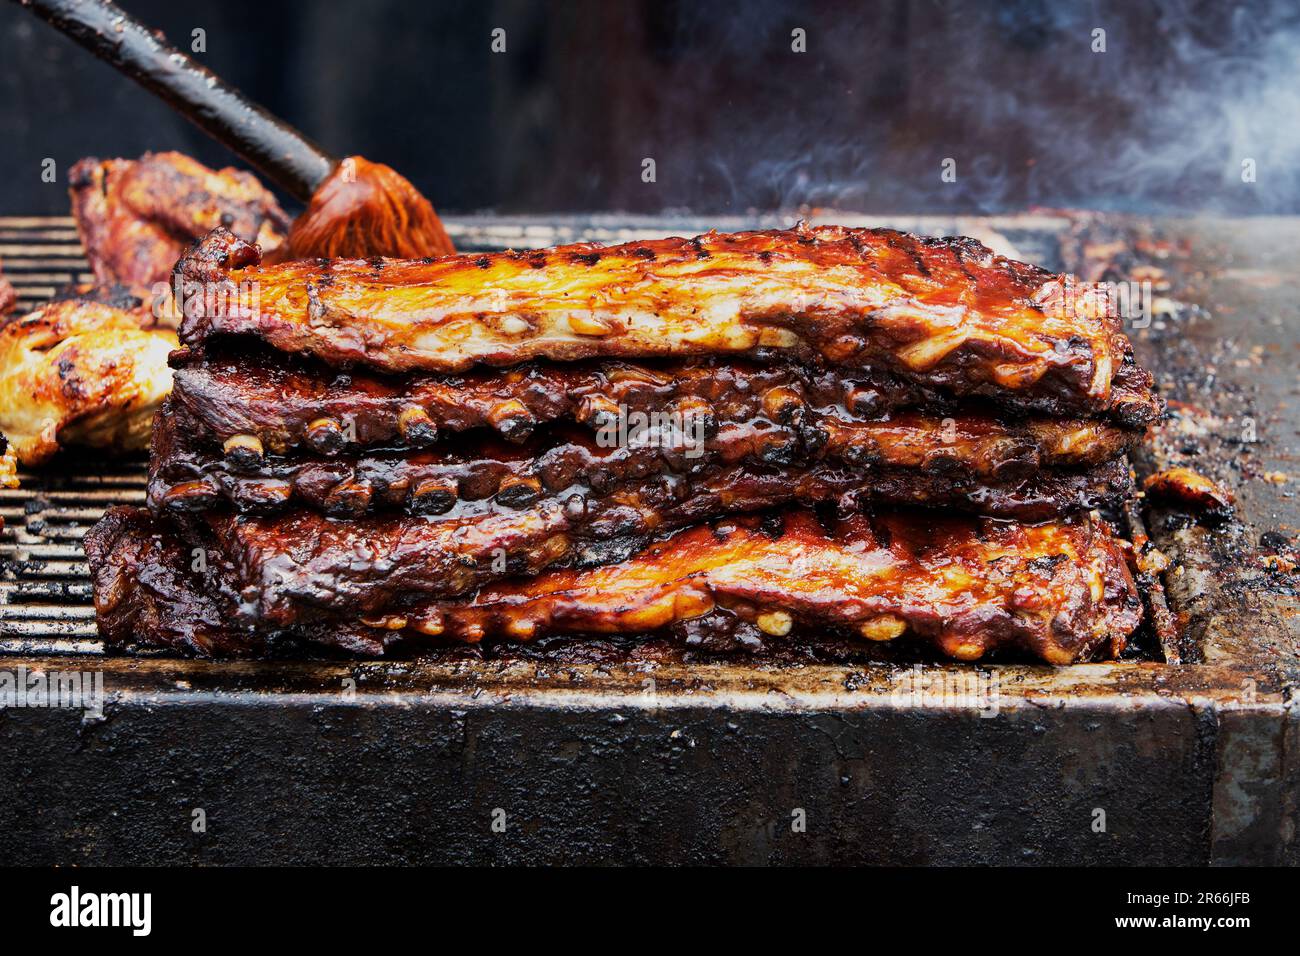 Ribfest Food Festival Ribs abd Chicken Pulled Pork Barbecue Grill Cooking Stockfoto